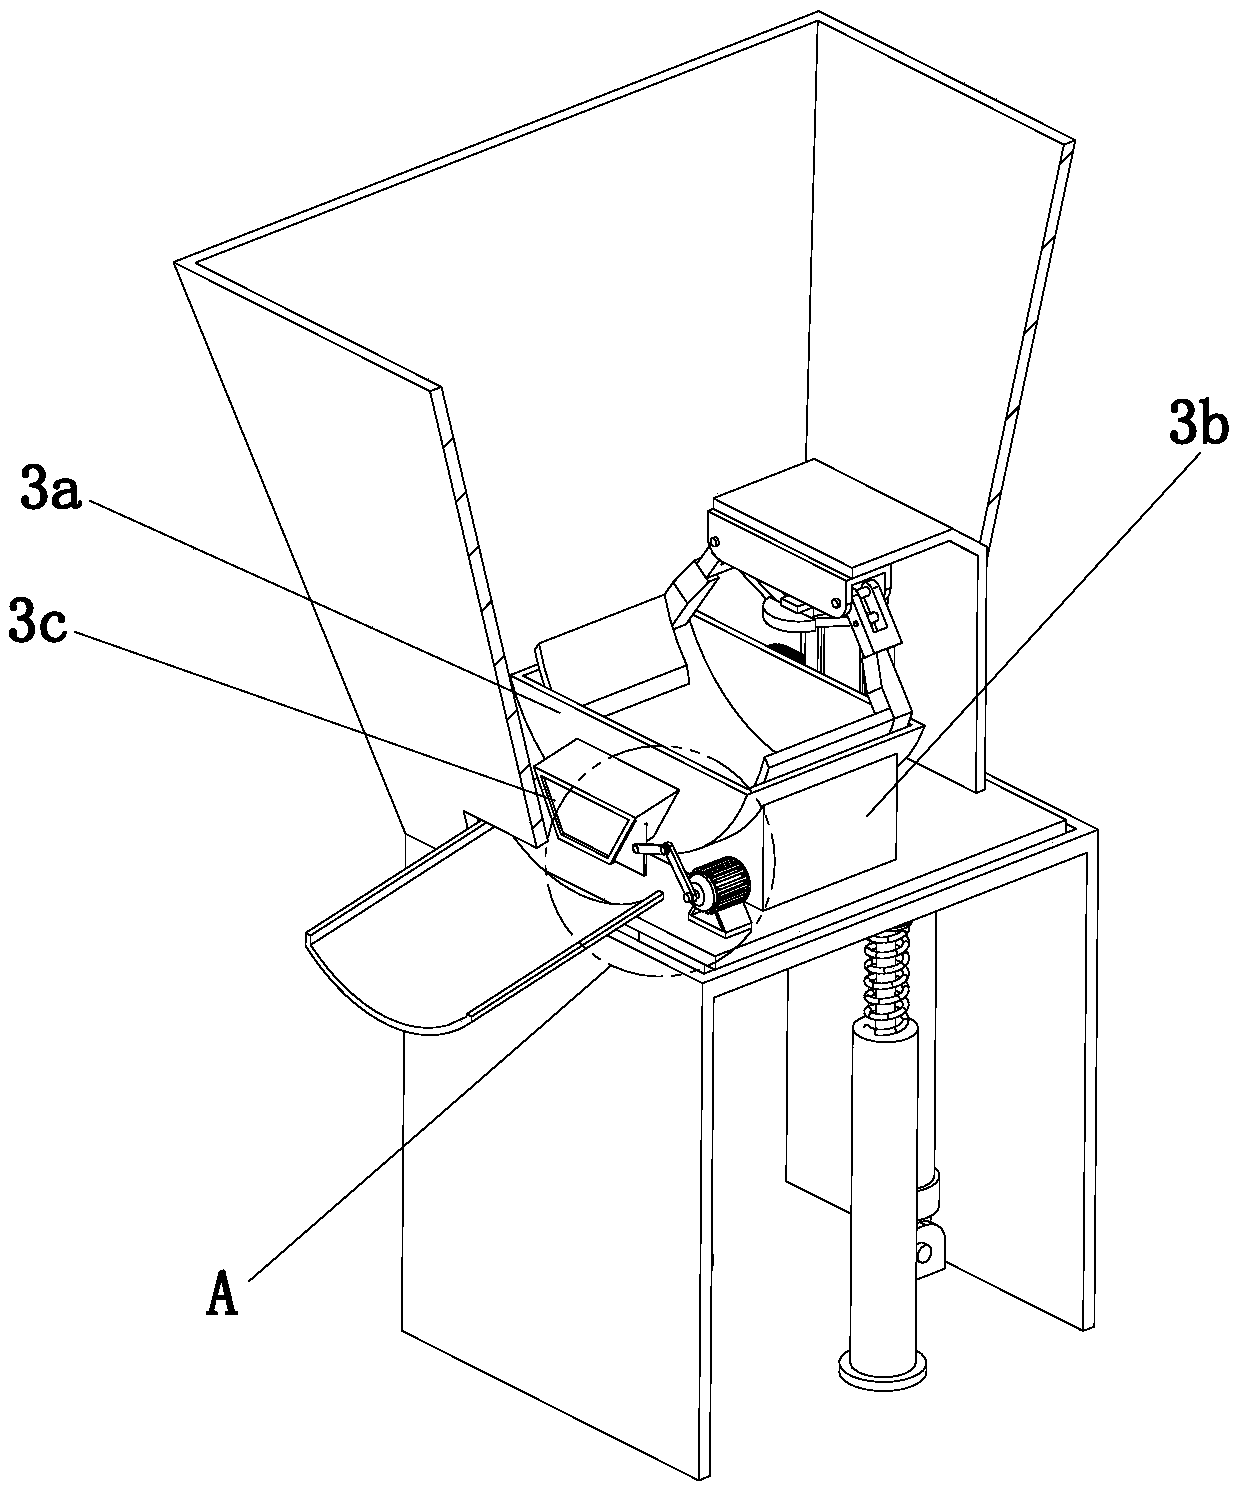 Working method of automatic chili sauce making device